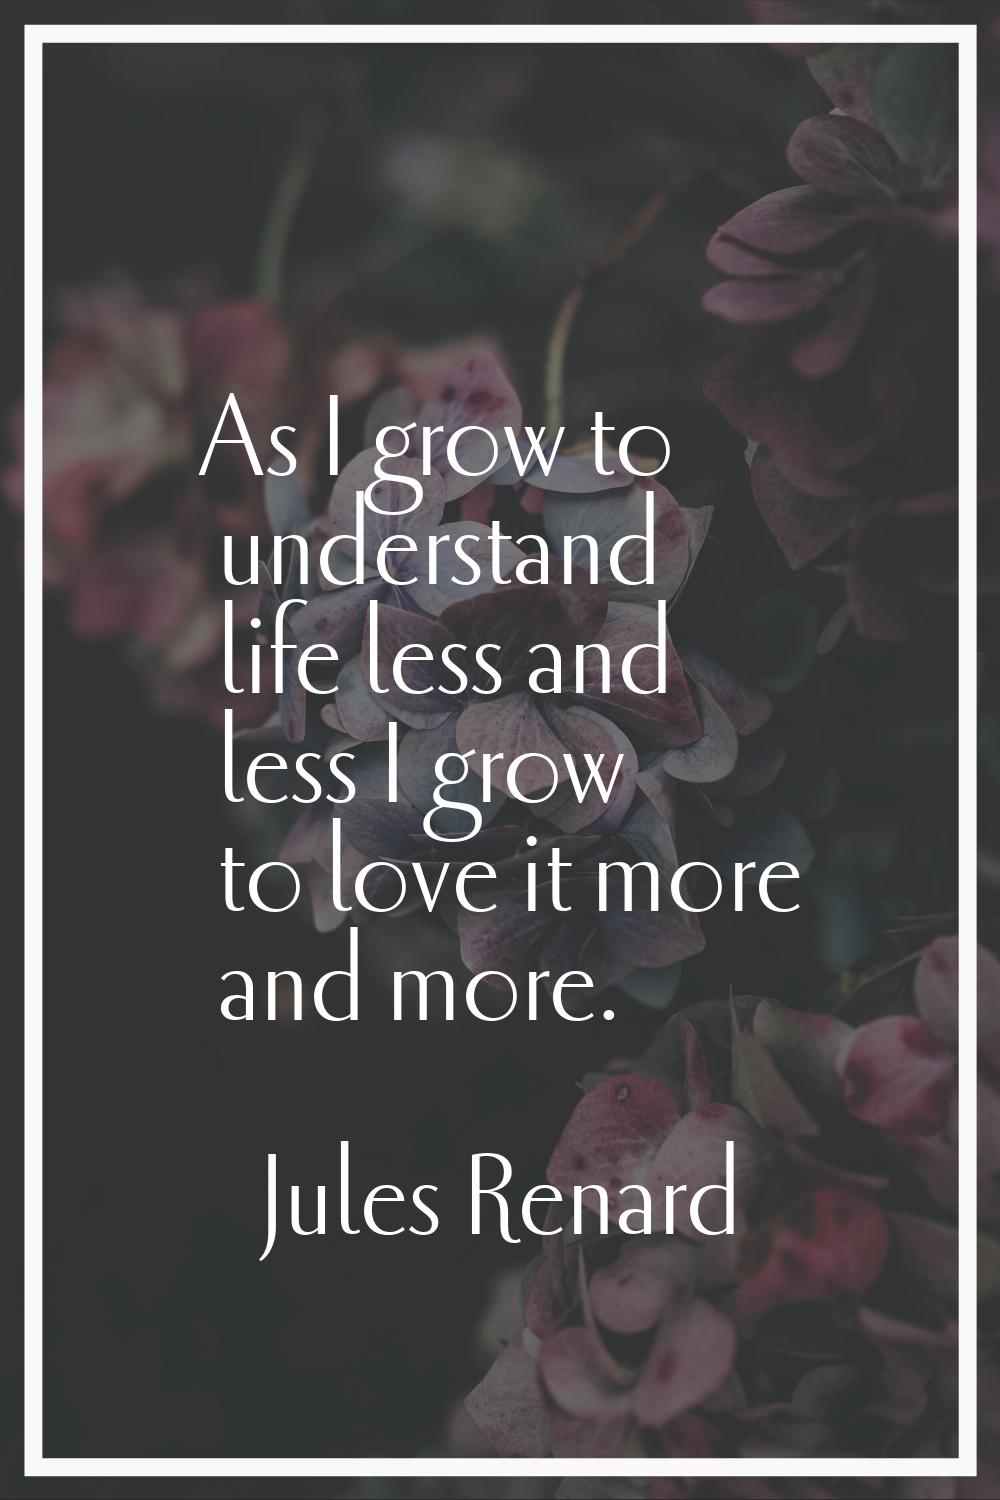 As I grow to understand life less and less I grow to love it more and more.